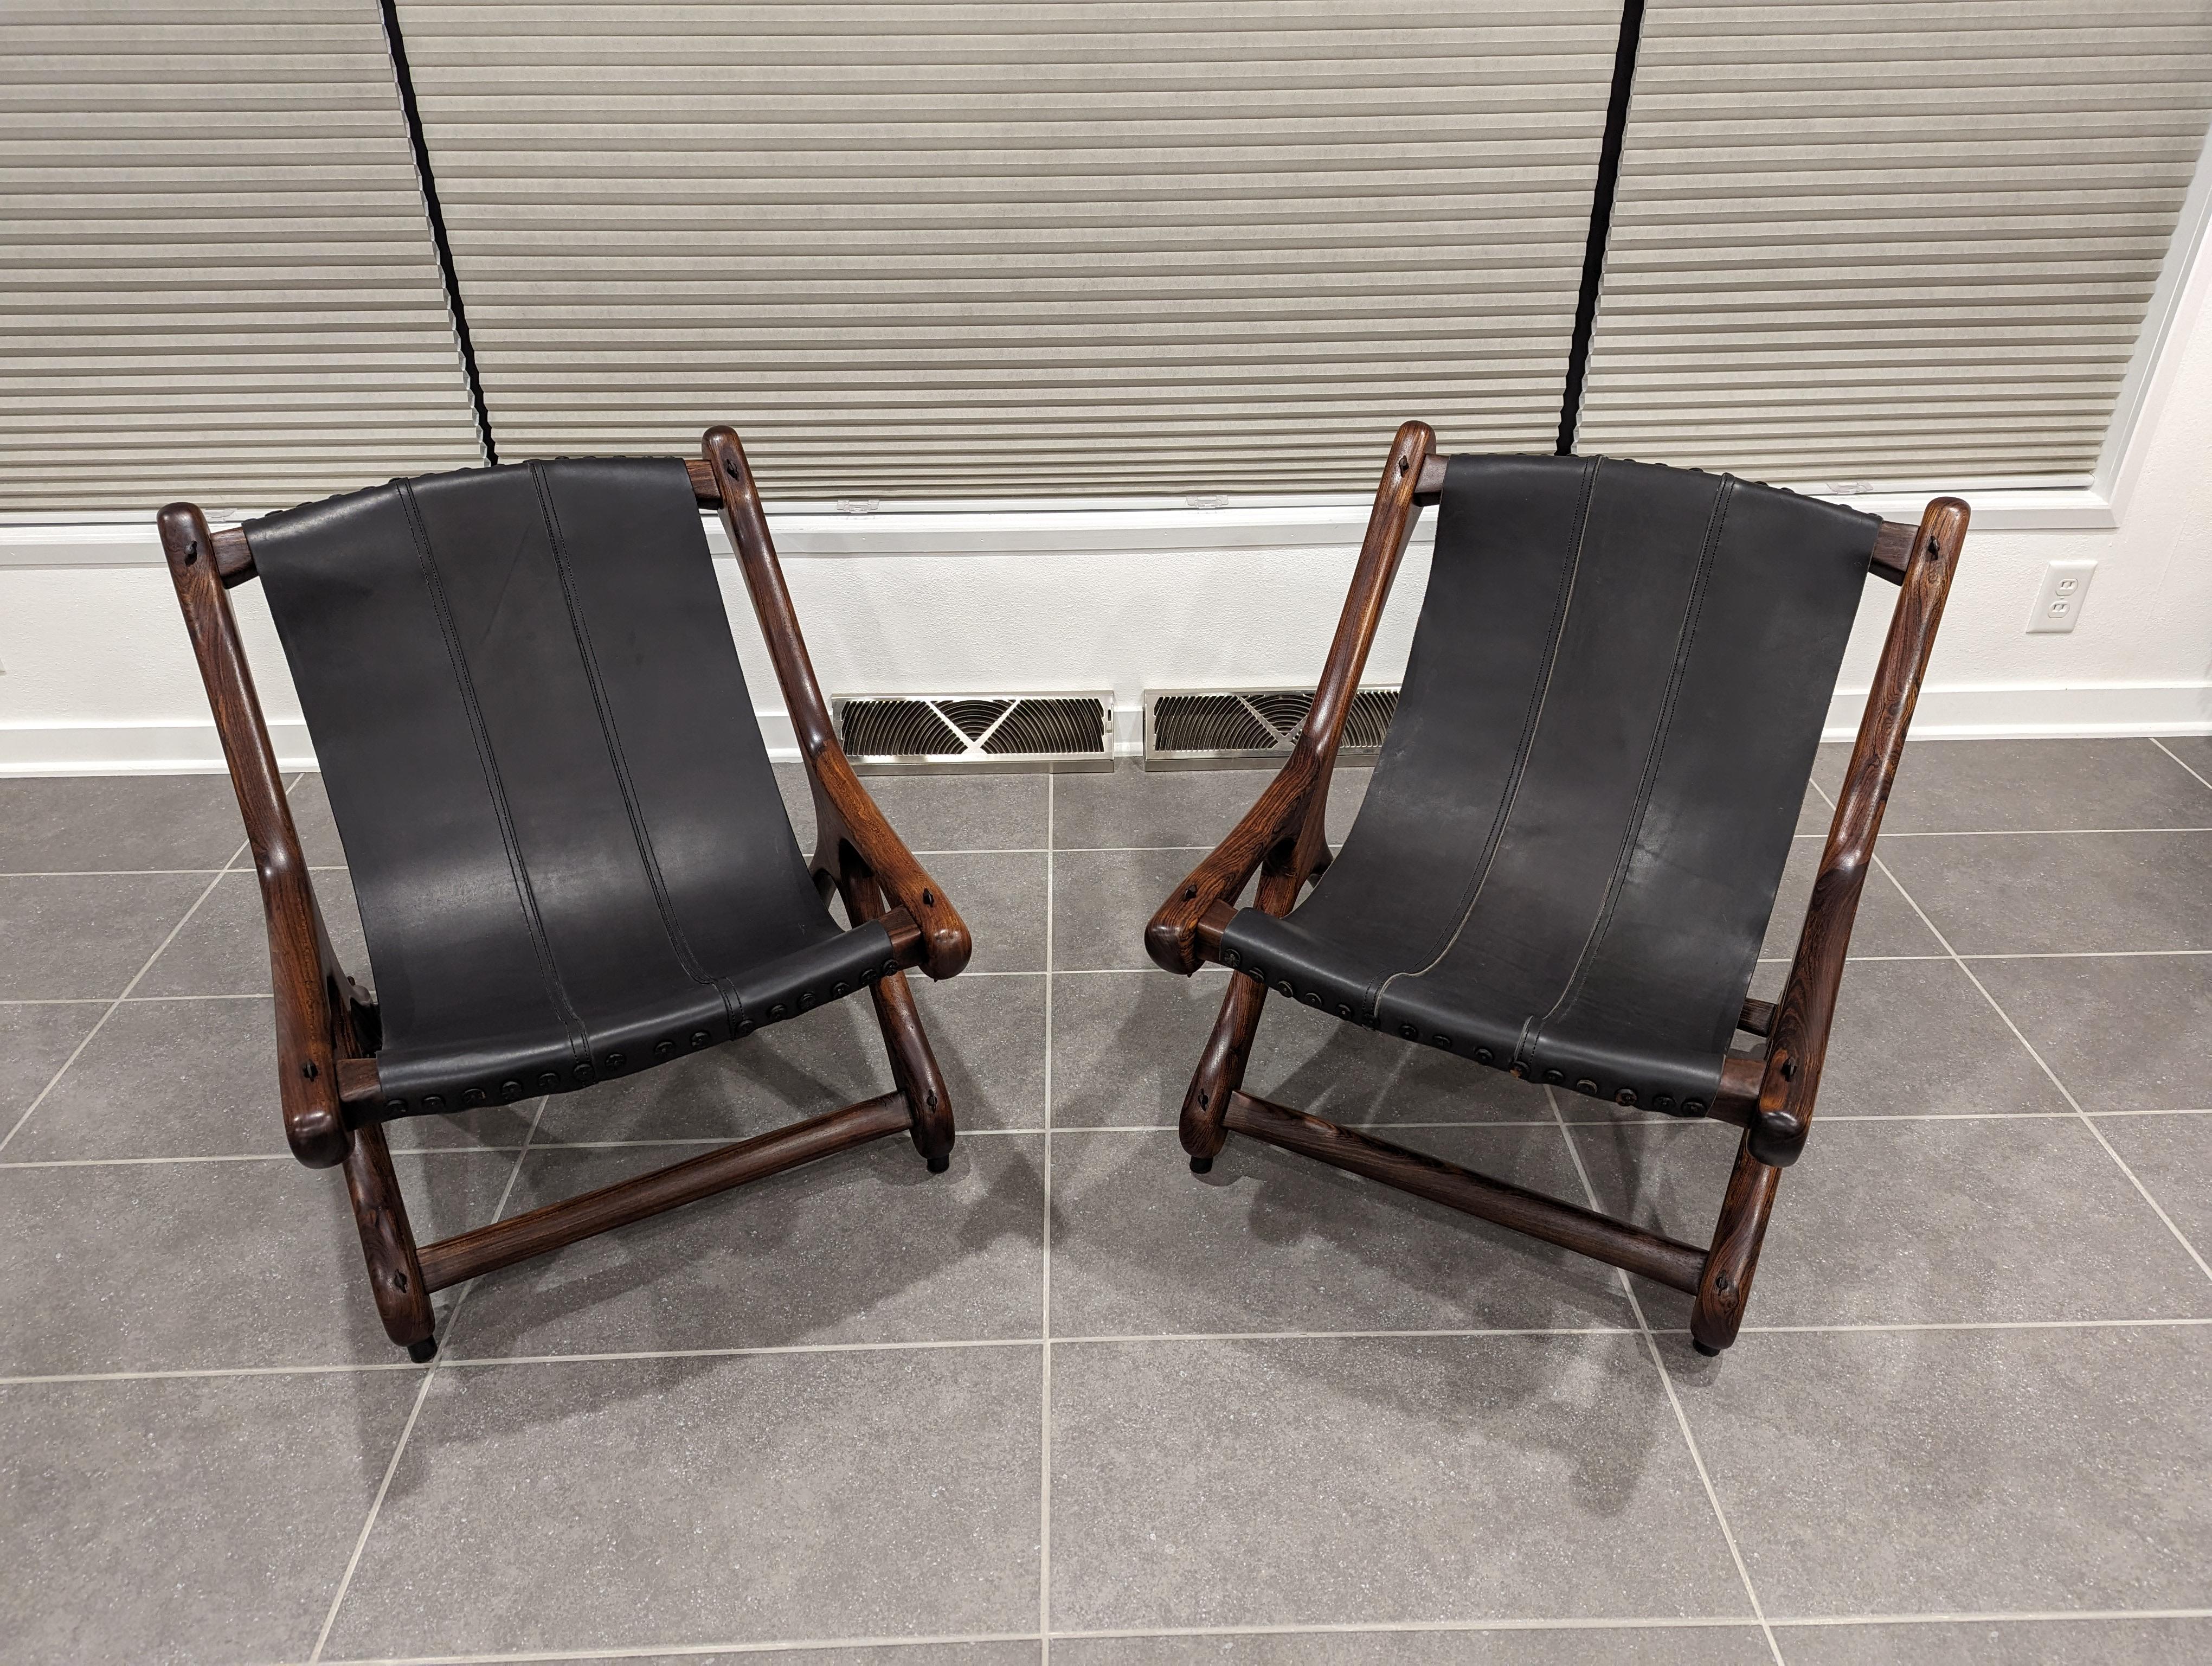 Don Shoemaker Sloucher Rosewood & Leather Sling Chairs for Señal, S.A., 1960s For Sale 3